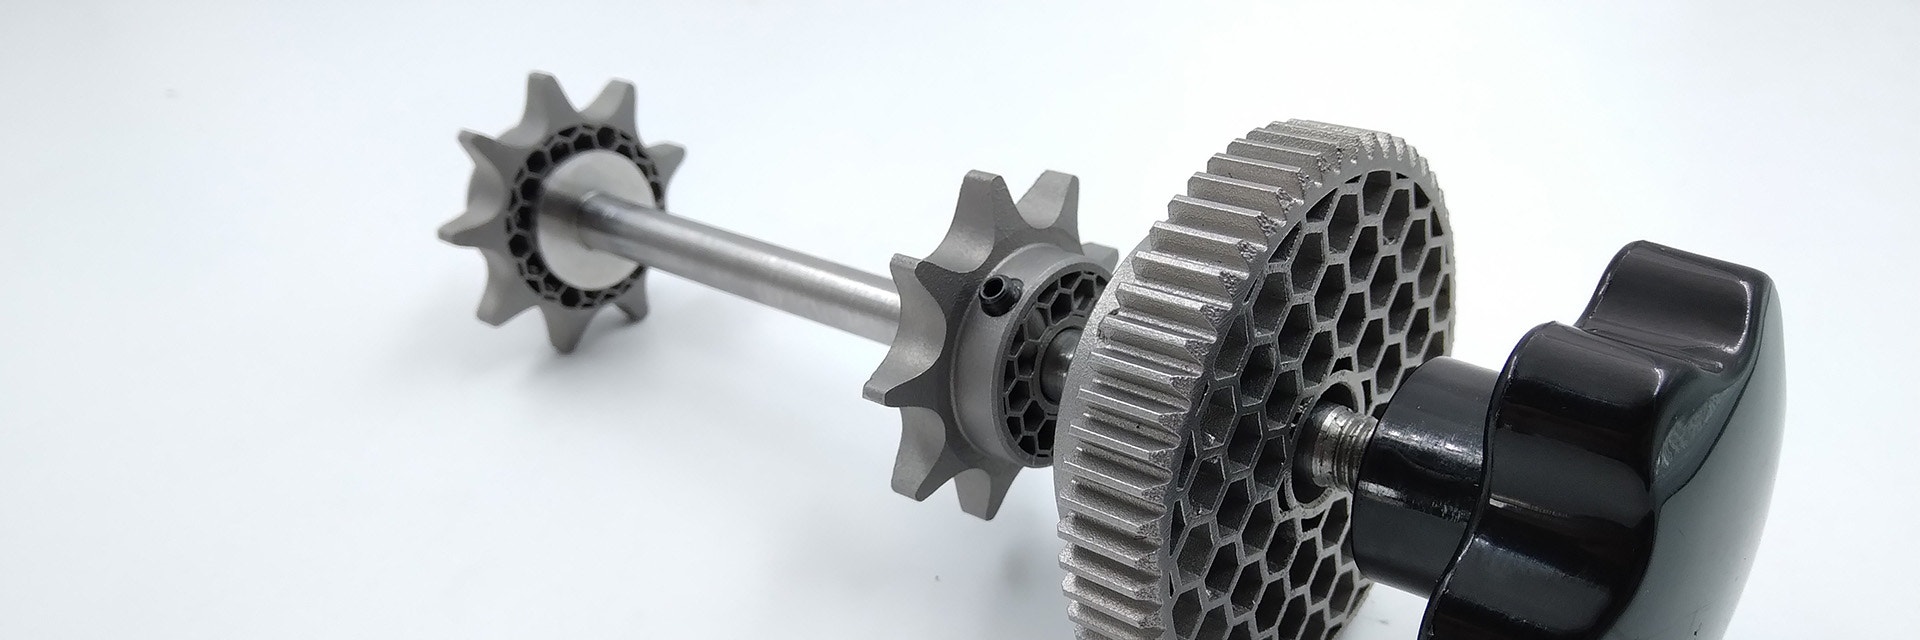 A metal shaft with 3D-printed gears and sprockets